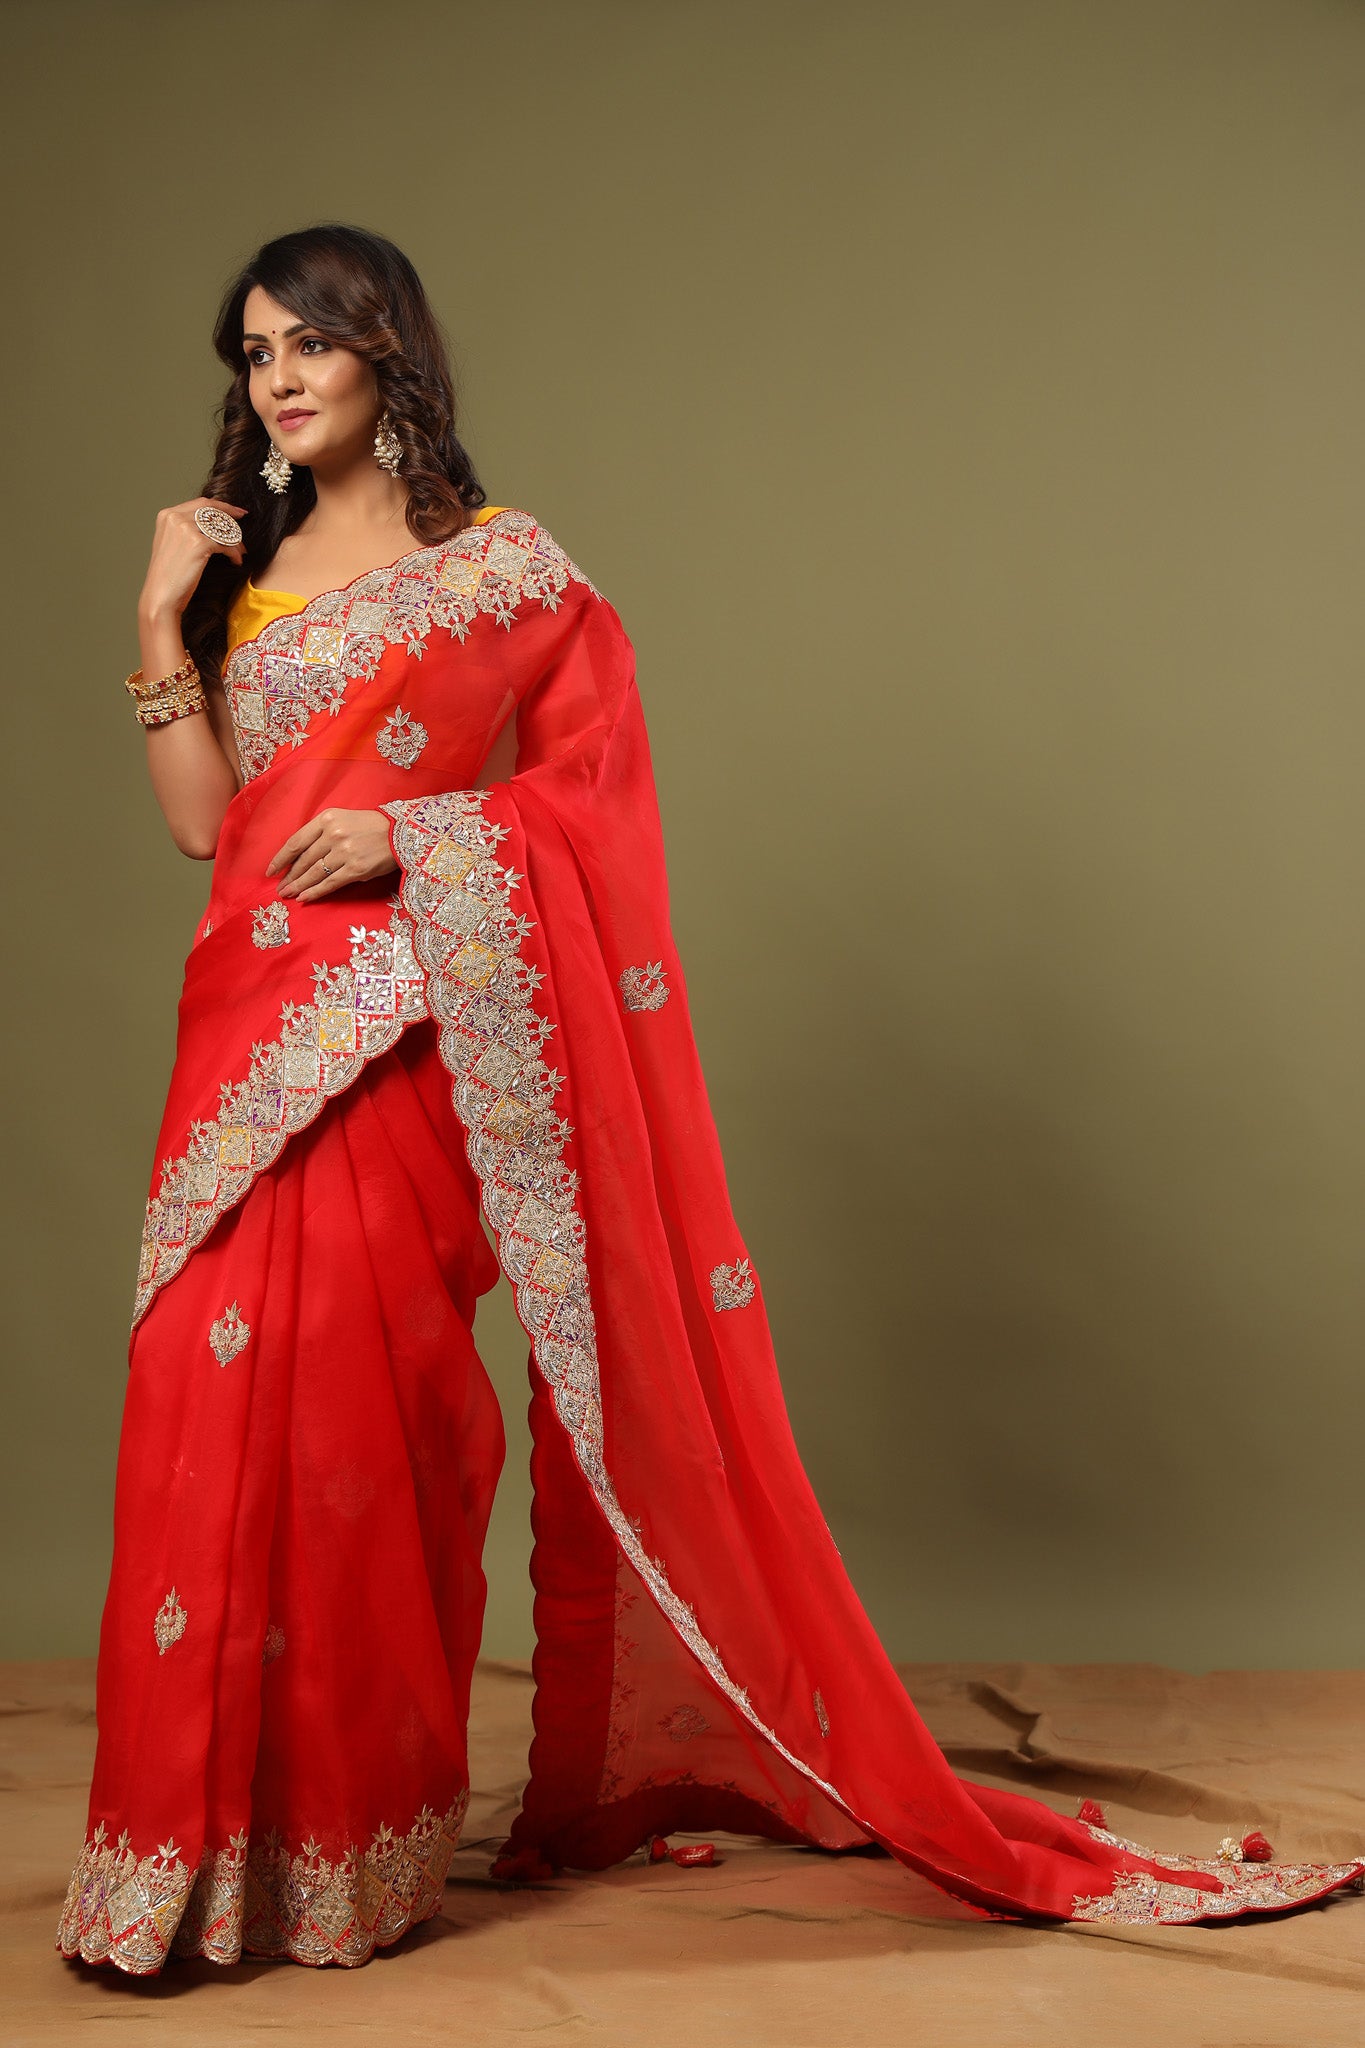 Buy stunning red hand embroidered organza sari online in USA. Make a fashion statement at weddings with stunning designer sarees, embroidered sarees with blouse, wedding sarees, handloom sarees from Pure Elegance Indian fashion store in USA.-side 